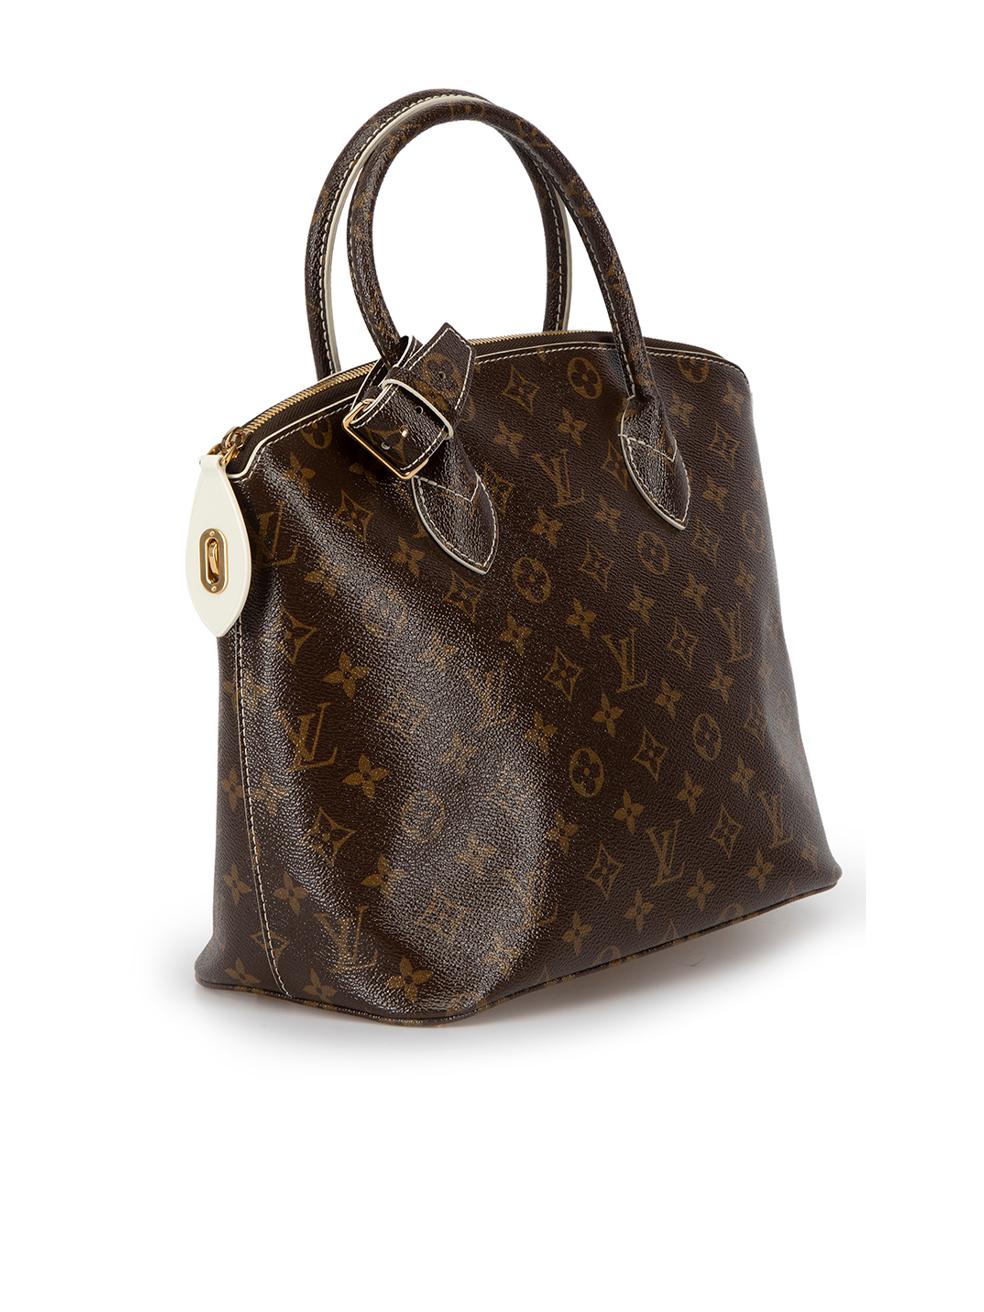 CONDITION is Never Worn. No visible wear to bag is evident on this used Louis Vuitton designer resale item. This item comes with original dust bag.



Details


2011

Brown

Coated canvas

Medium handbag

Signature LV monogram pattern

2x Rolled top